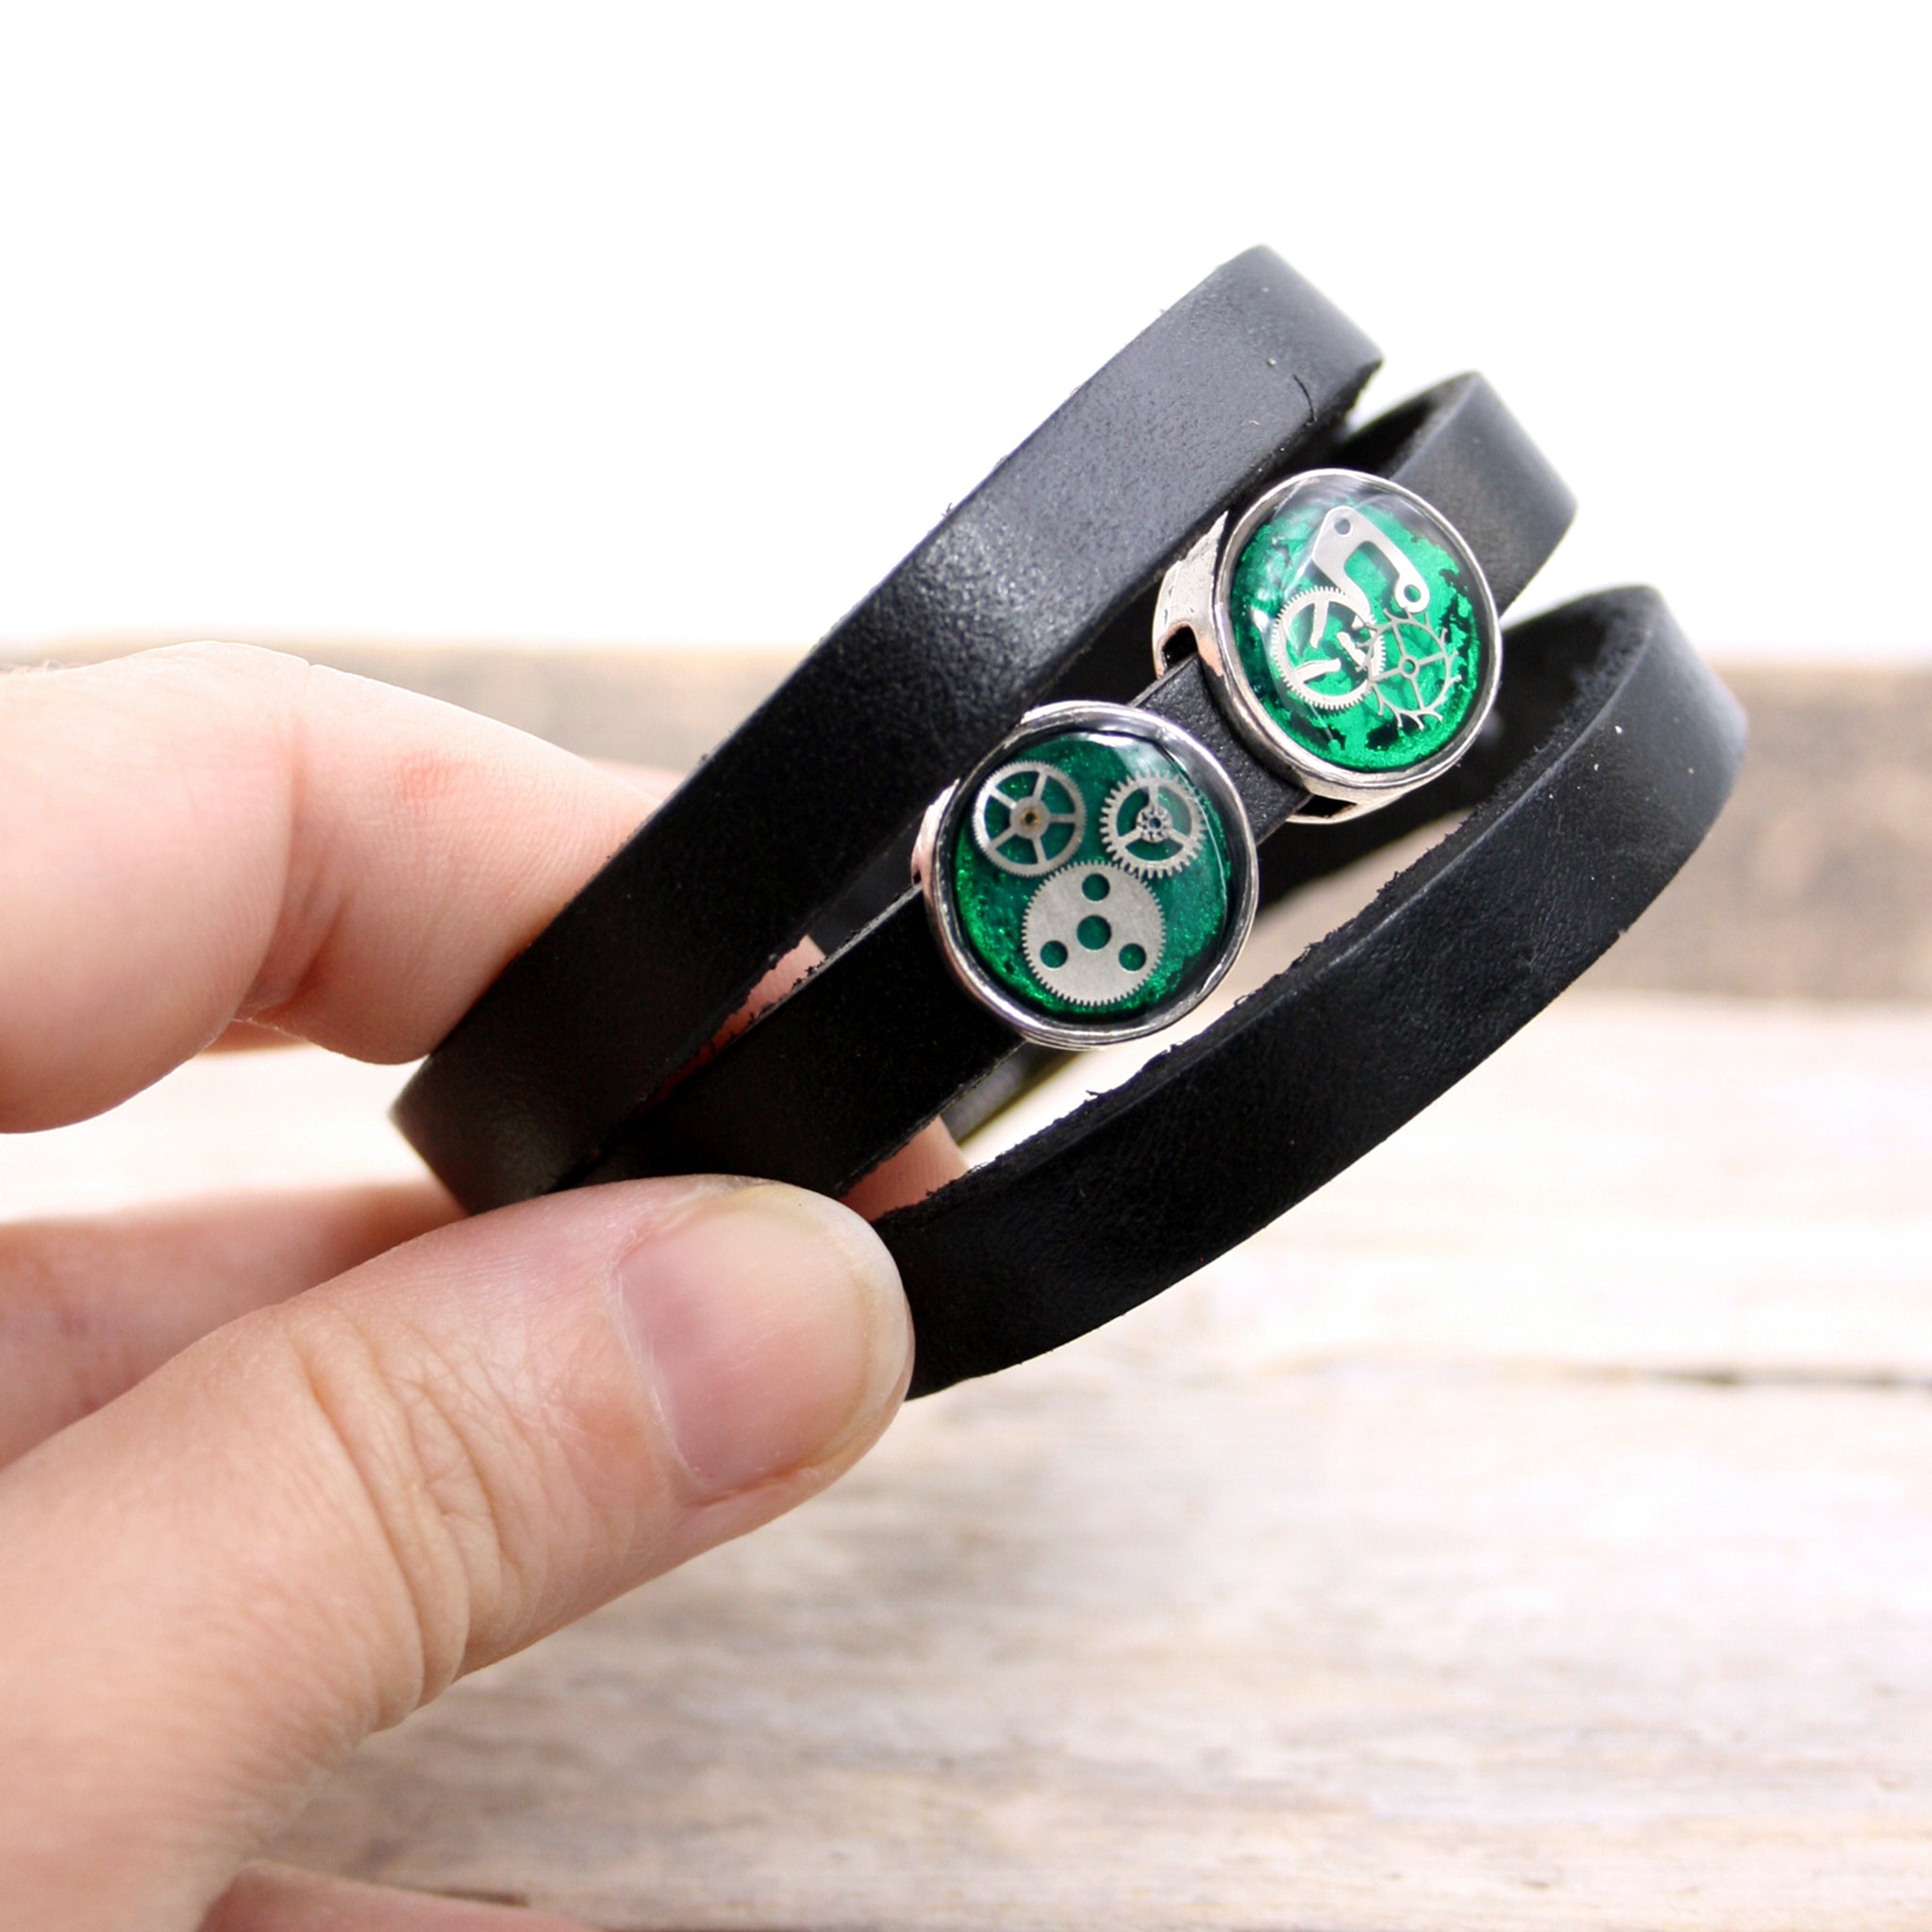 Black leather triple wrap bracelet with green steampunk slider beads with watch parts